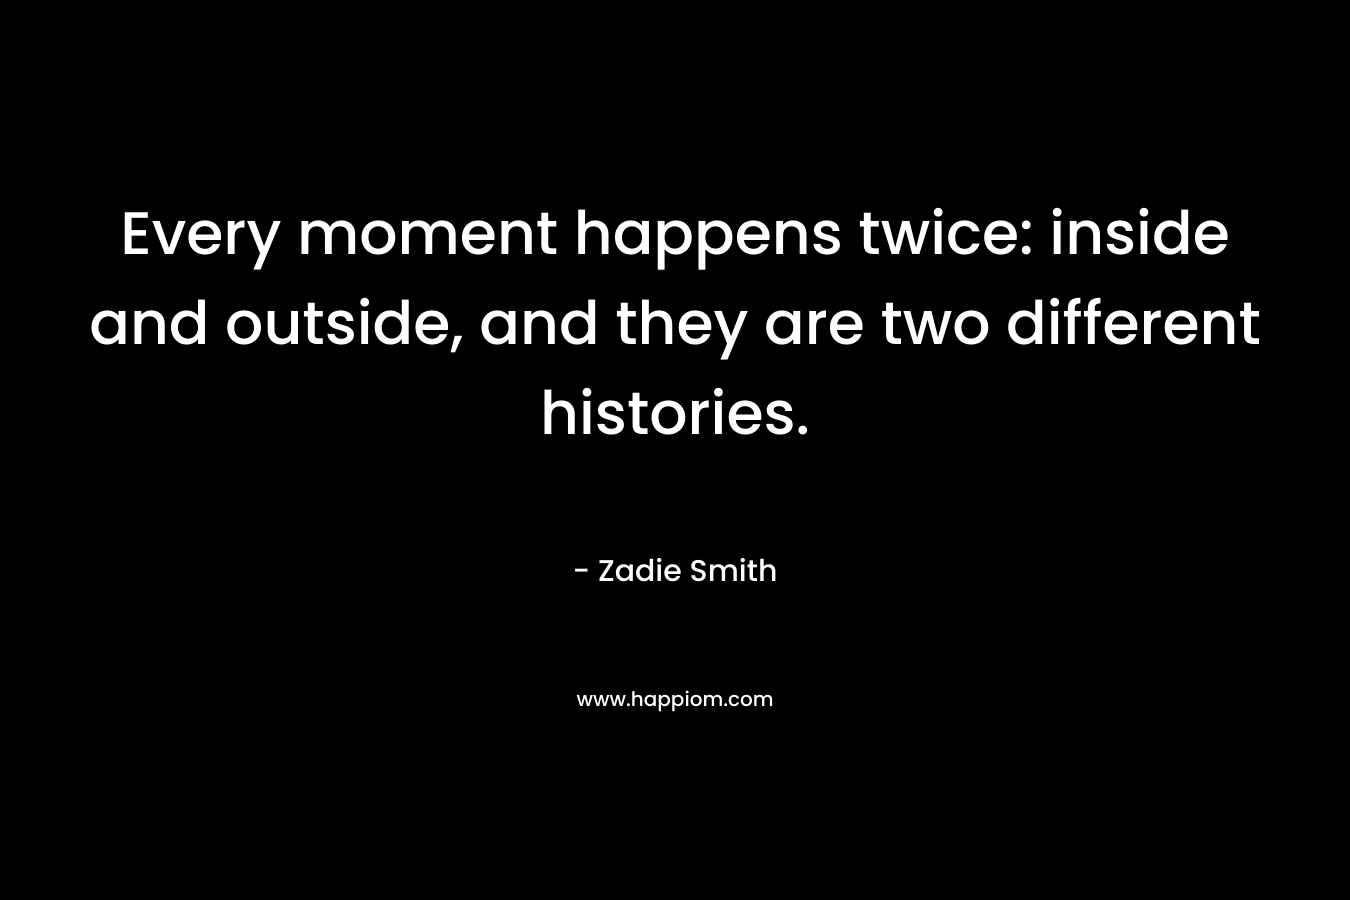 Every moment happens twice: inside and outside, and they are two different histories. – Zadie Smith